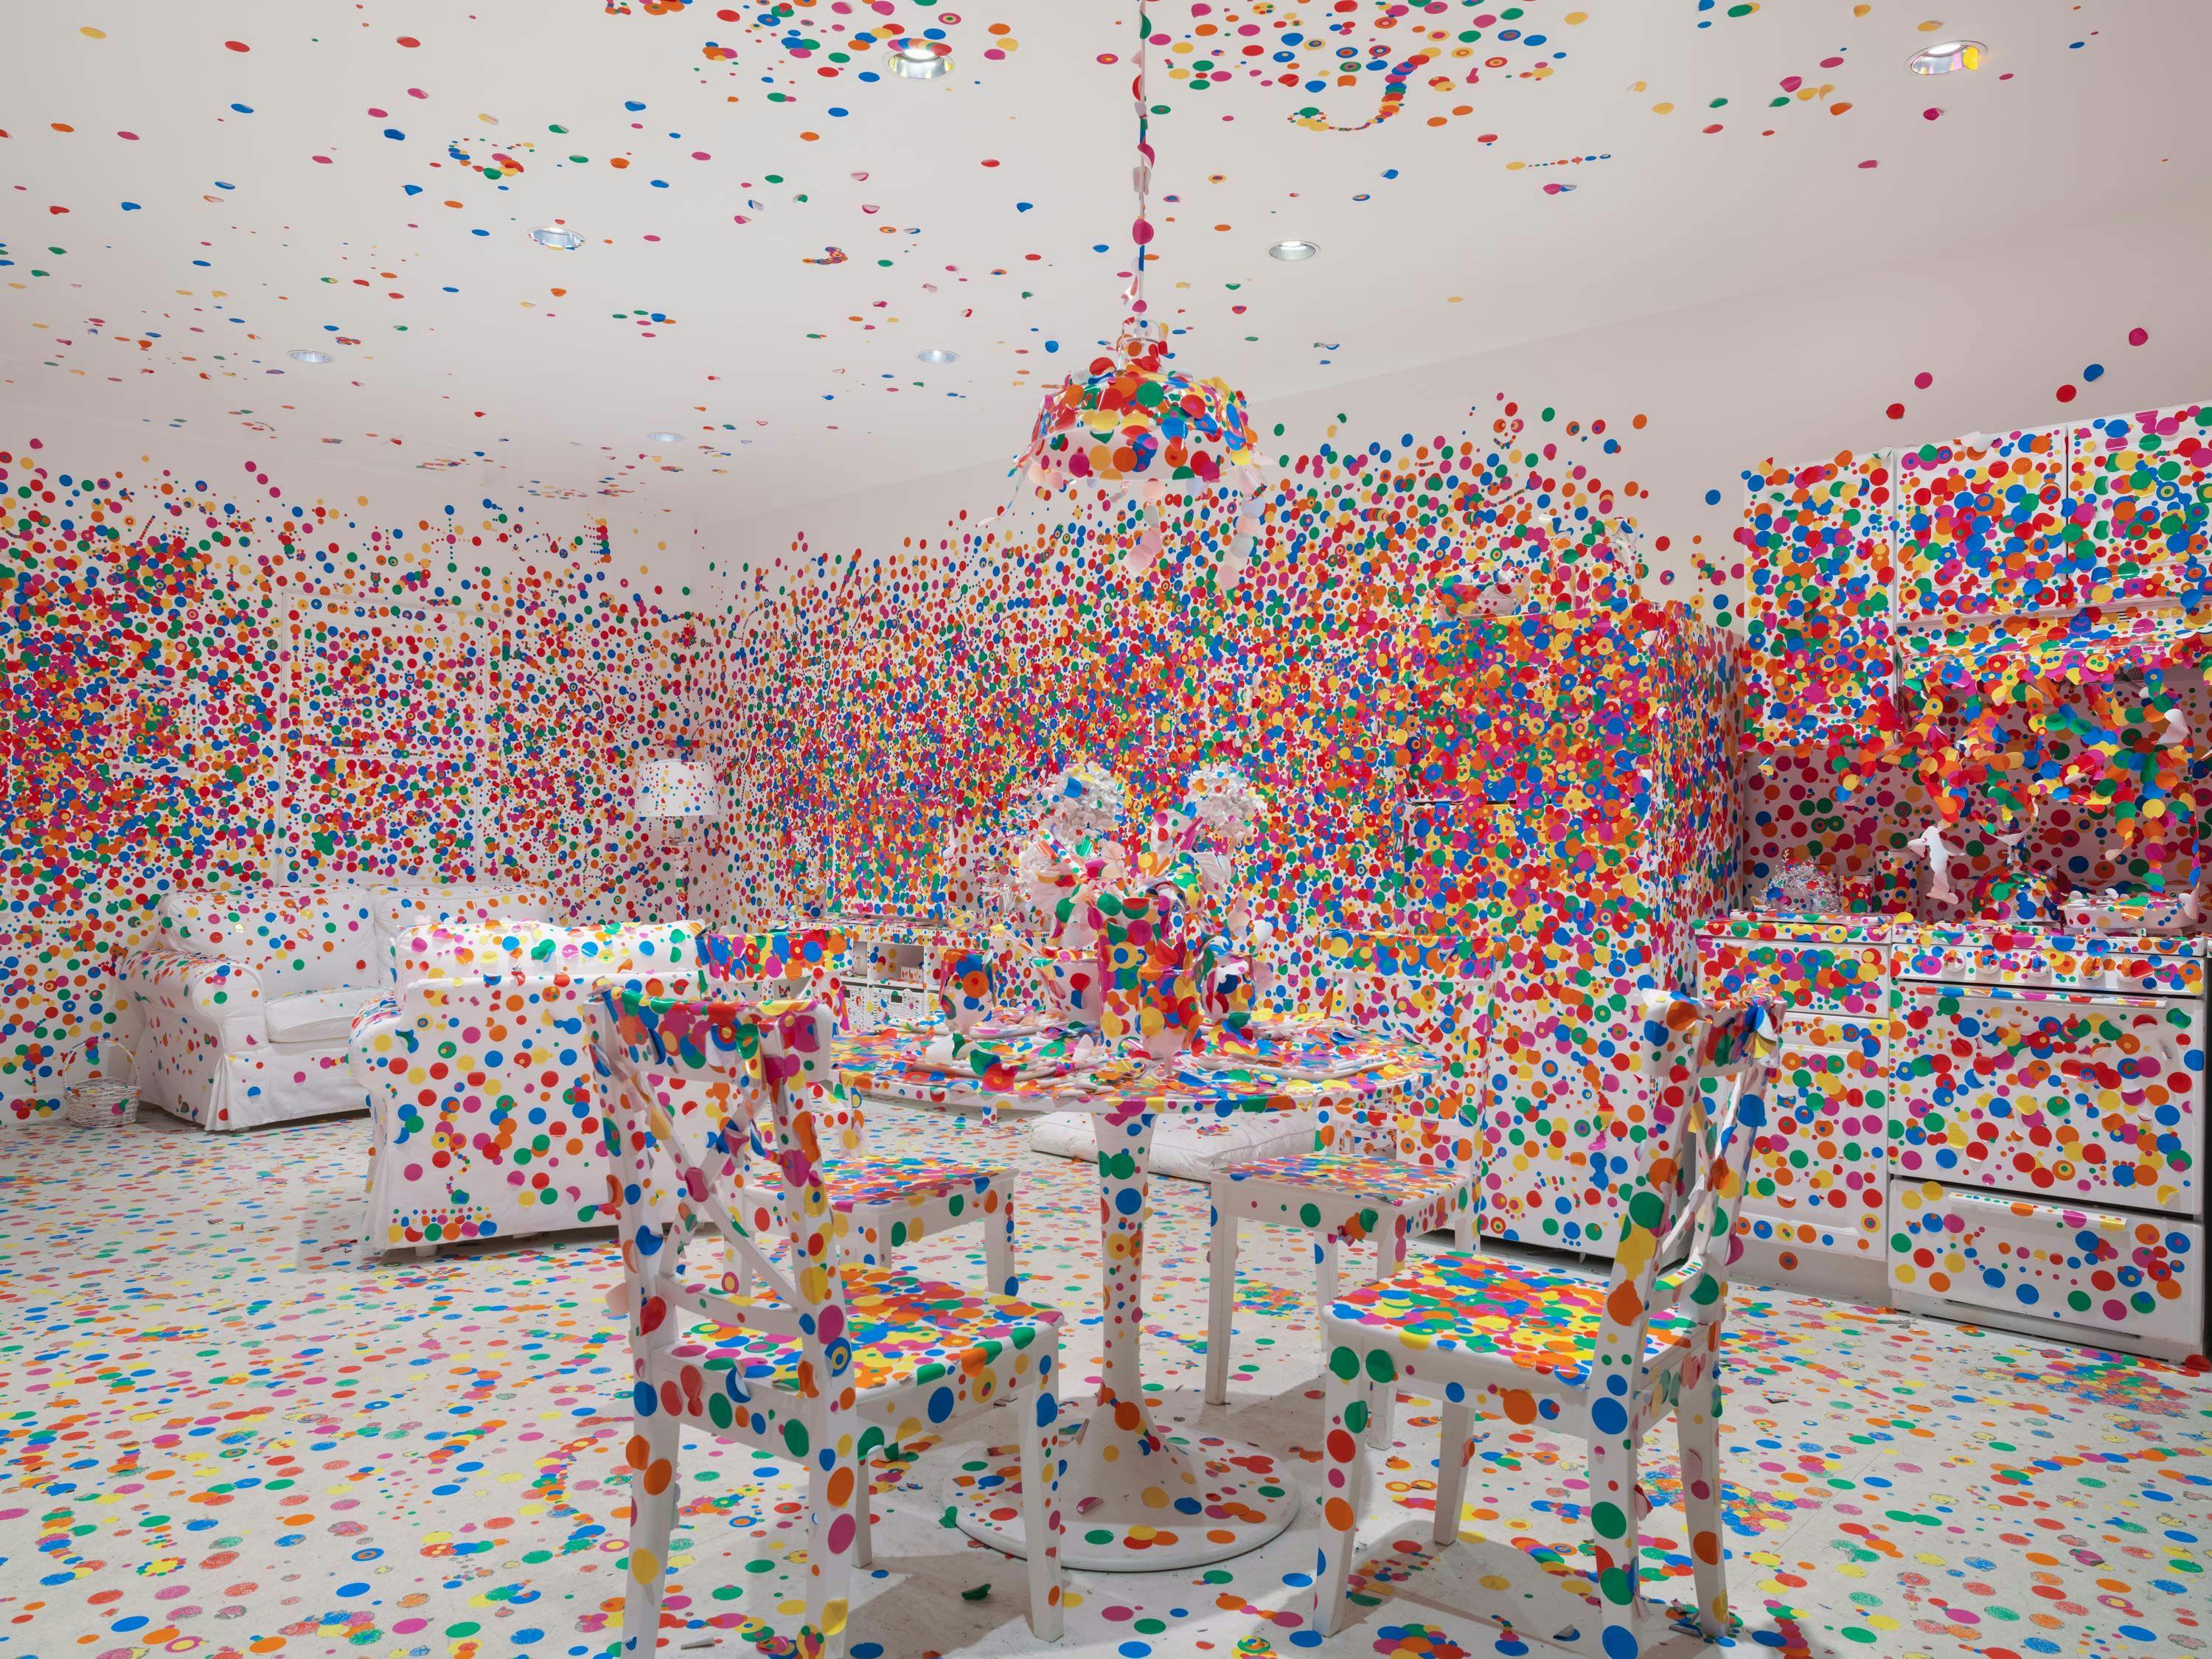 An installation by Yayoi Kusama, titled The obliteration room, dated 2002-present.